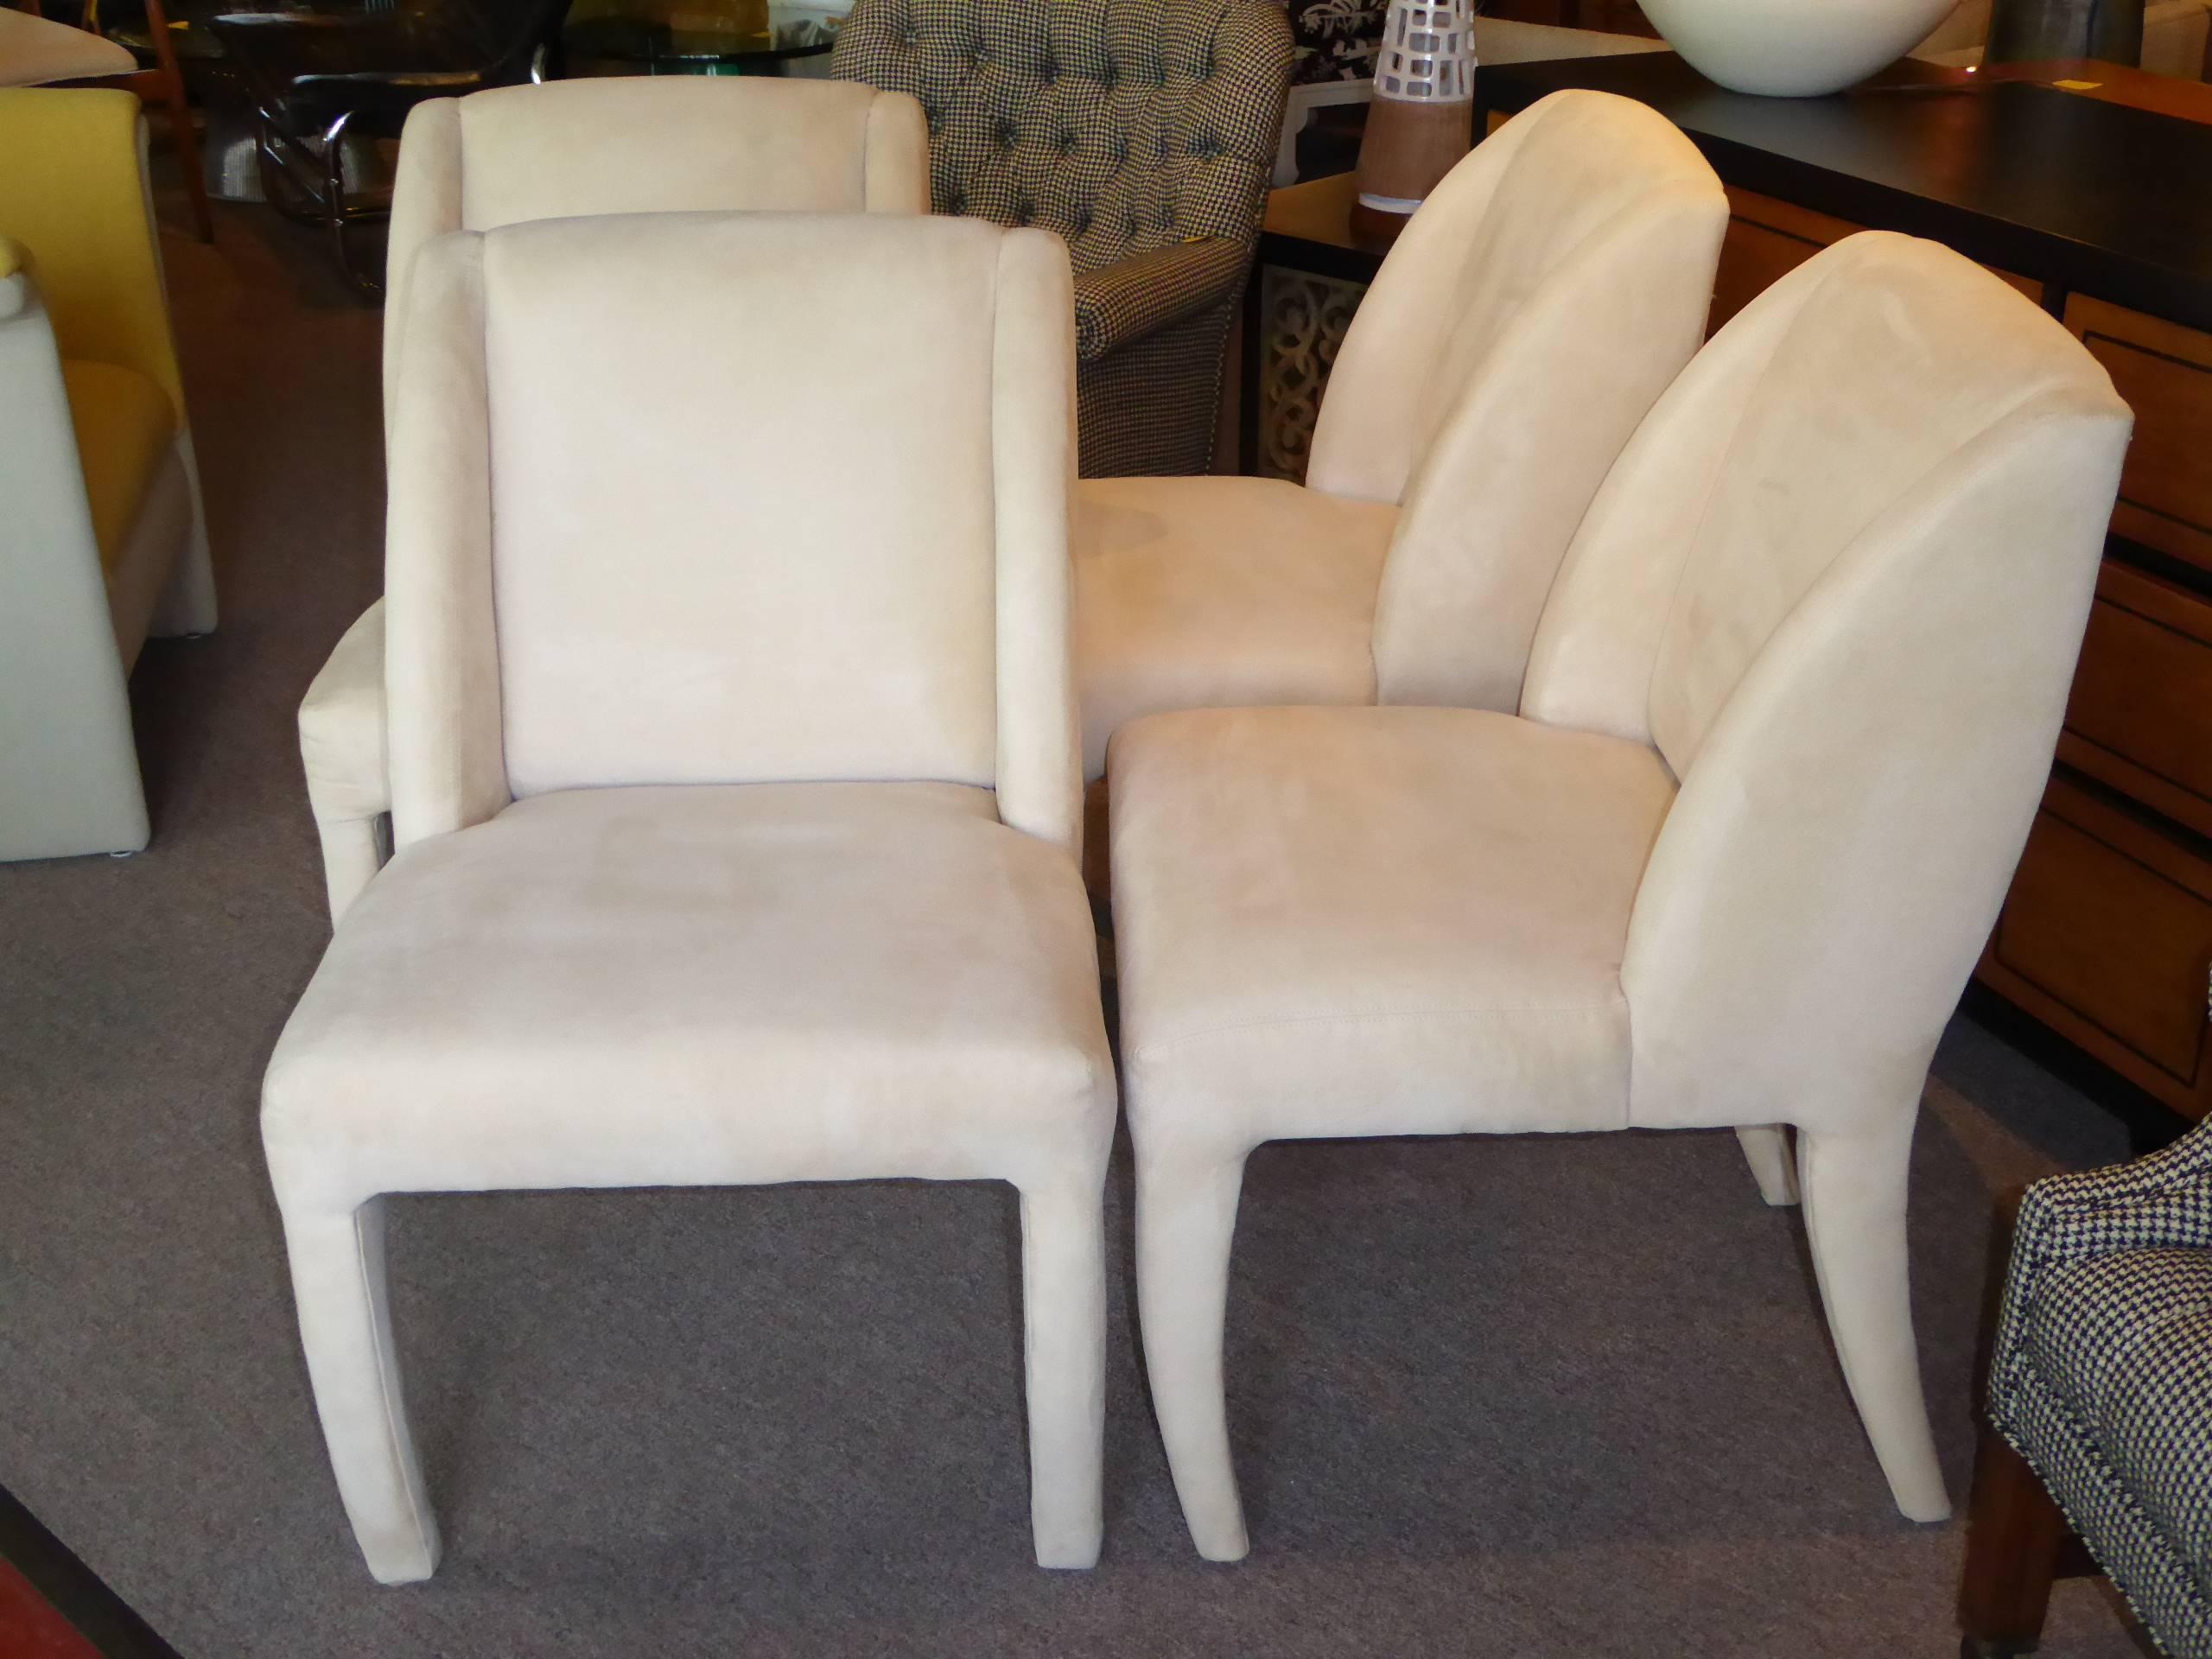 1980s Luxe Modern Ultrasuede Dining Chairs by Directional (amerikanisch)